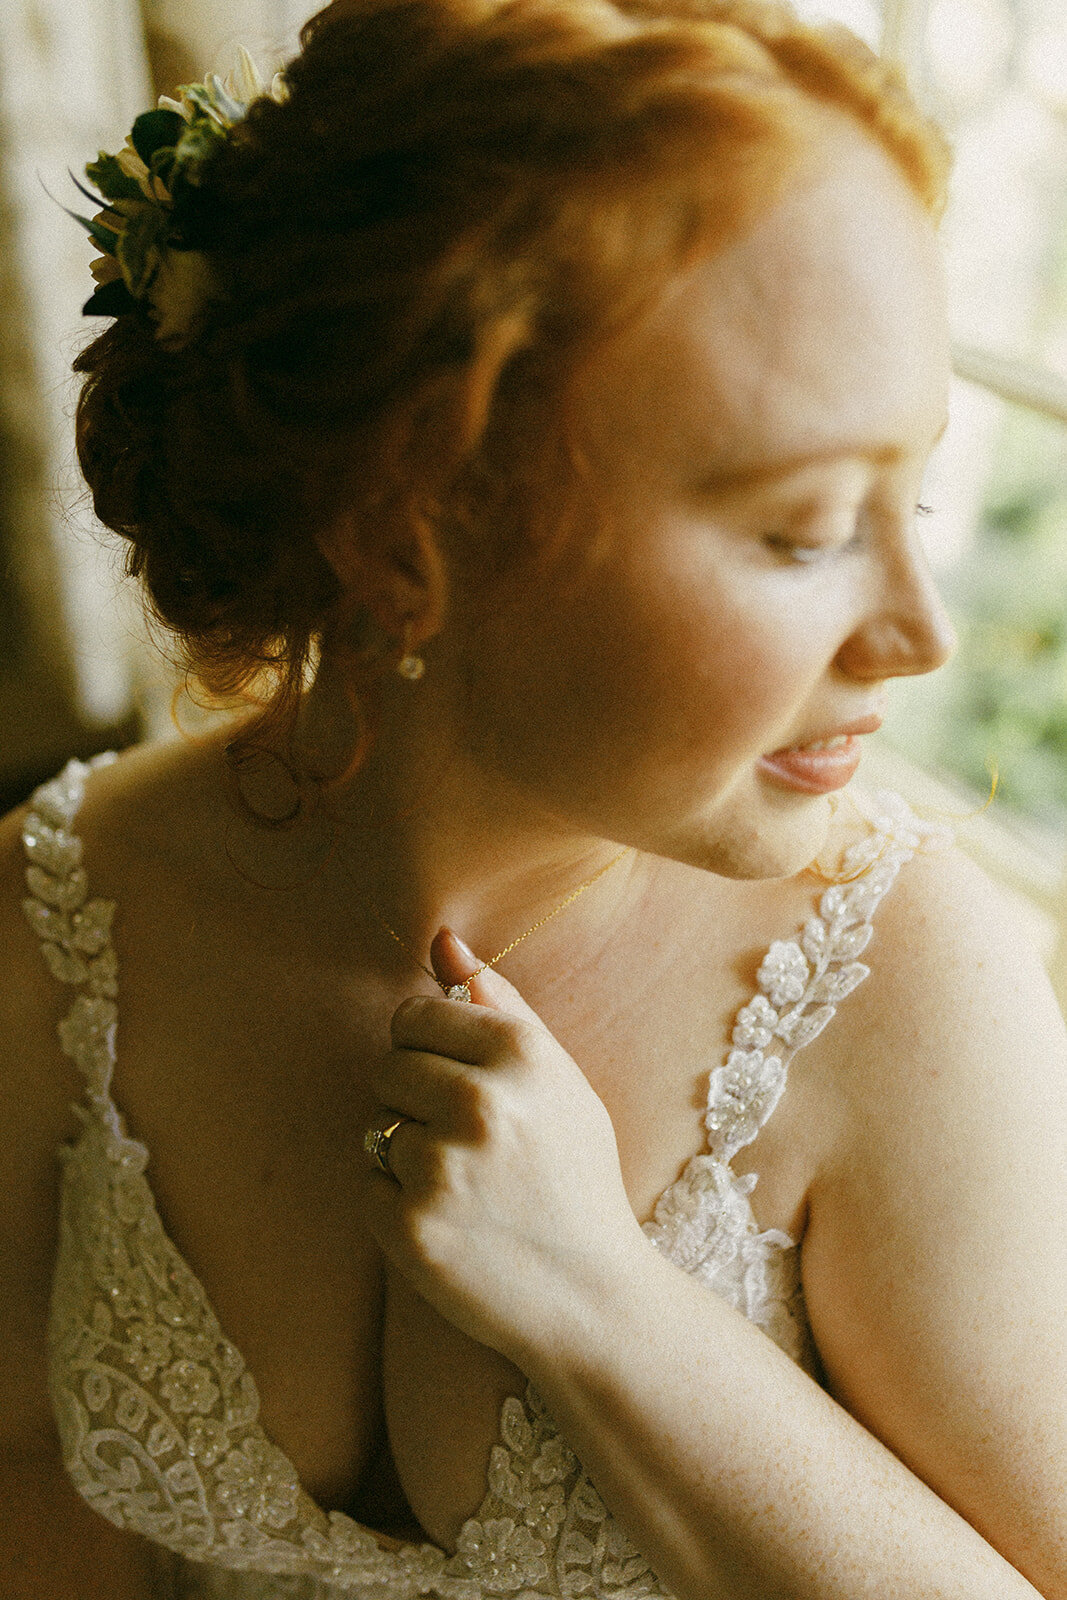 A girl with flowers in her red hair and a white dress gazes outside